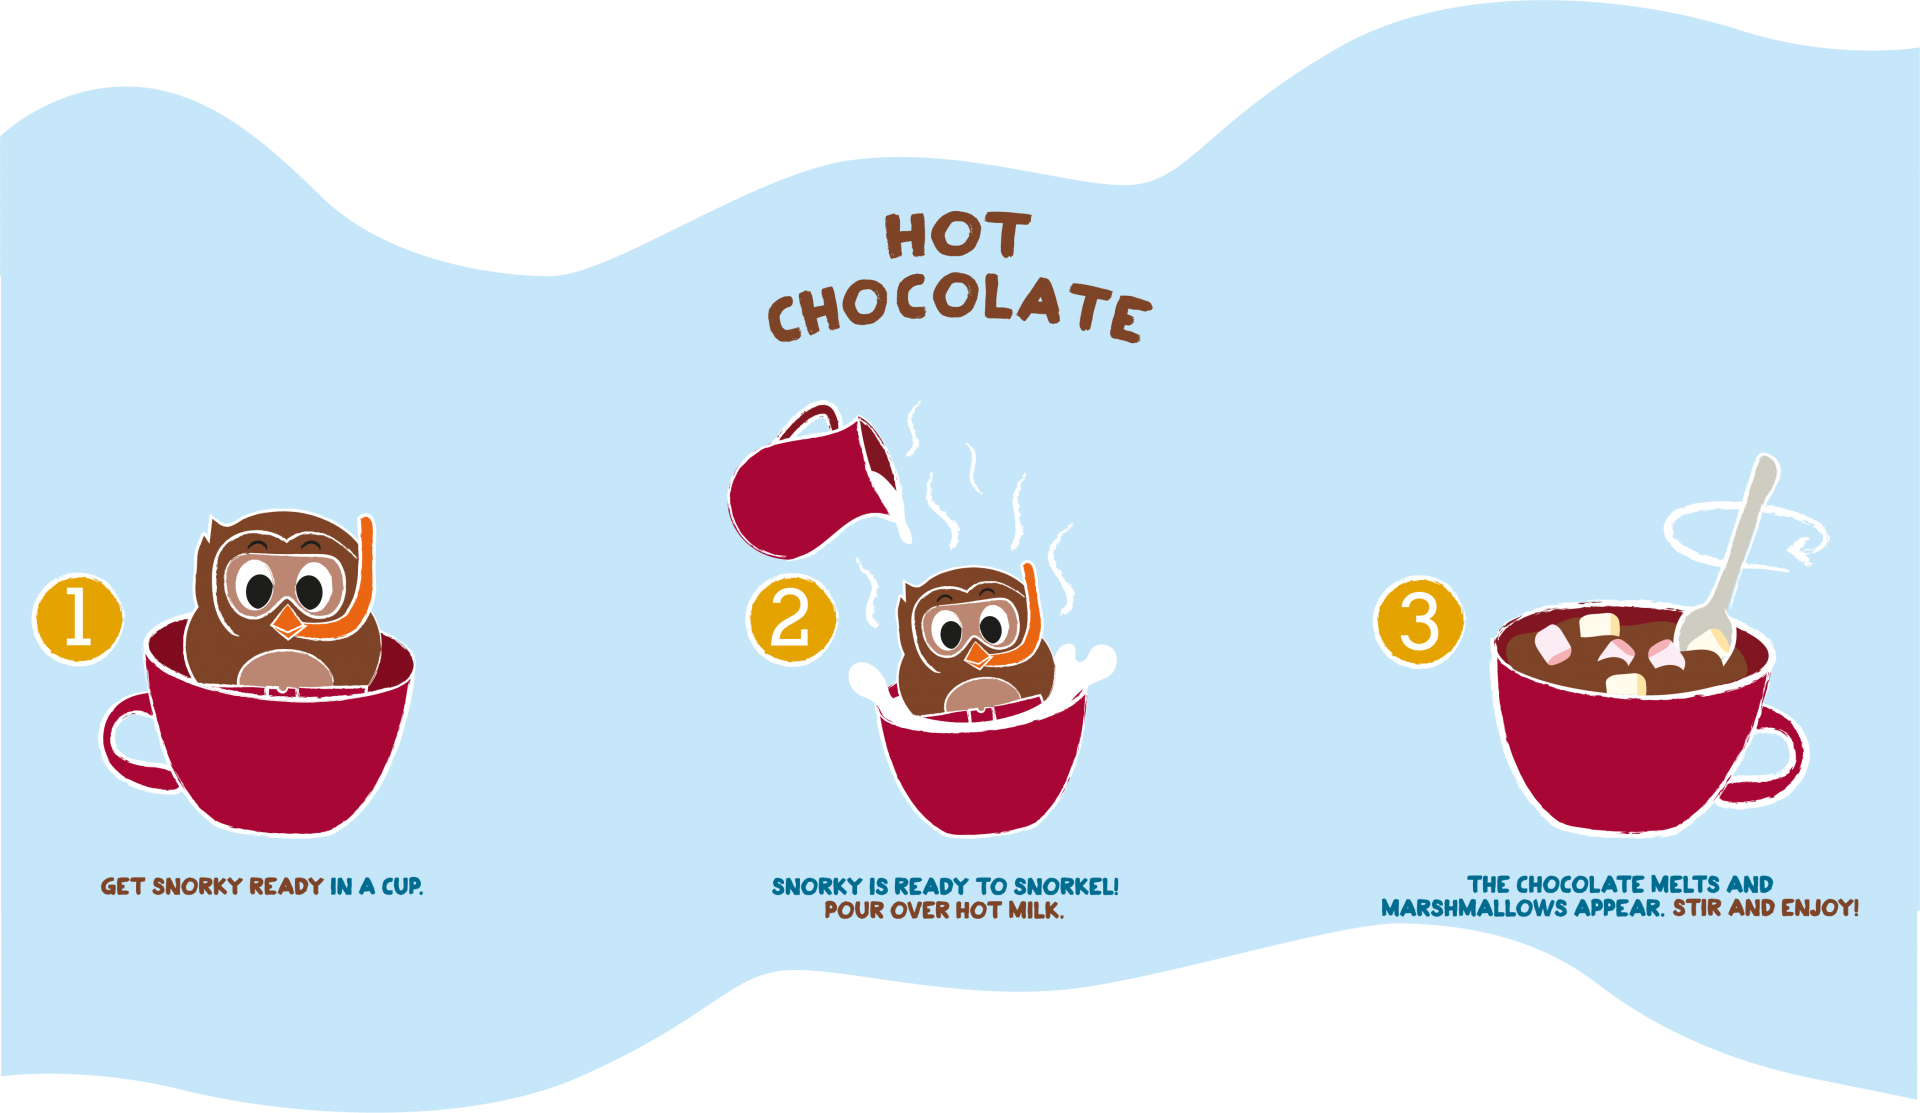 Hot Chocolate in 3 steps